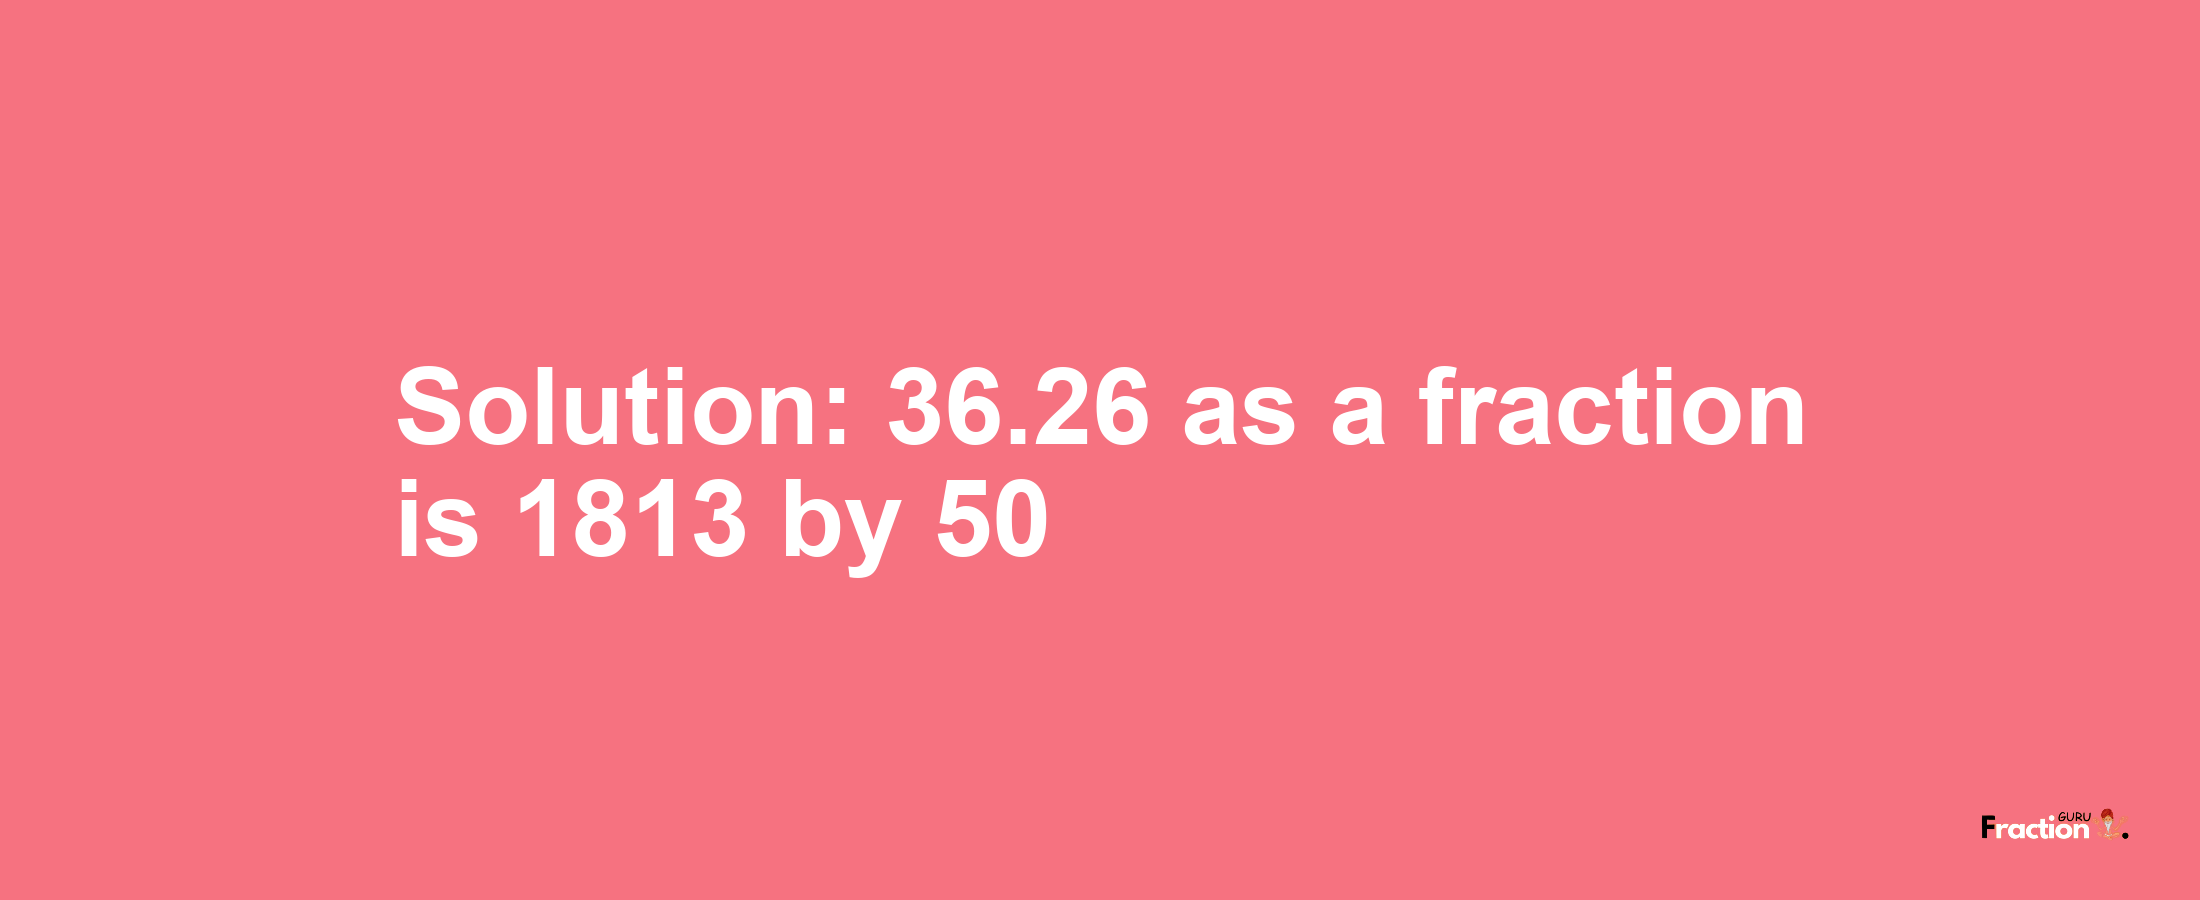 Solution:36.26 as a fraction is 1813/50